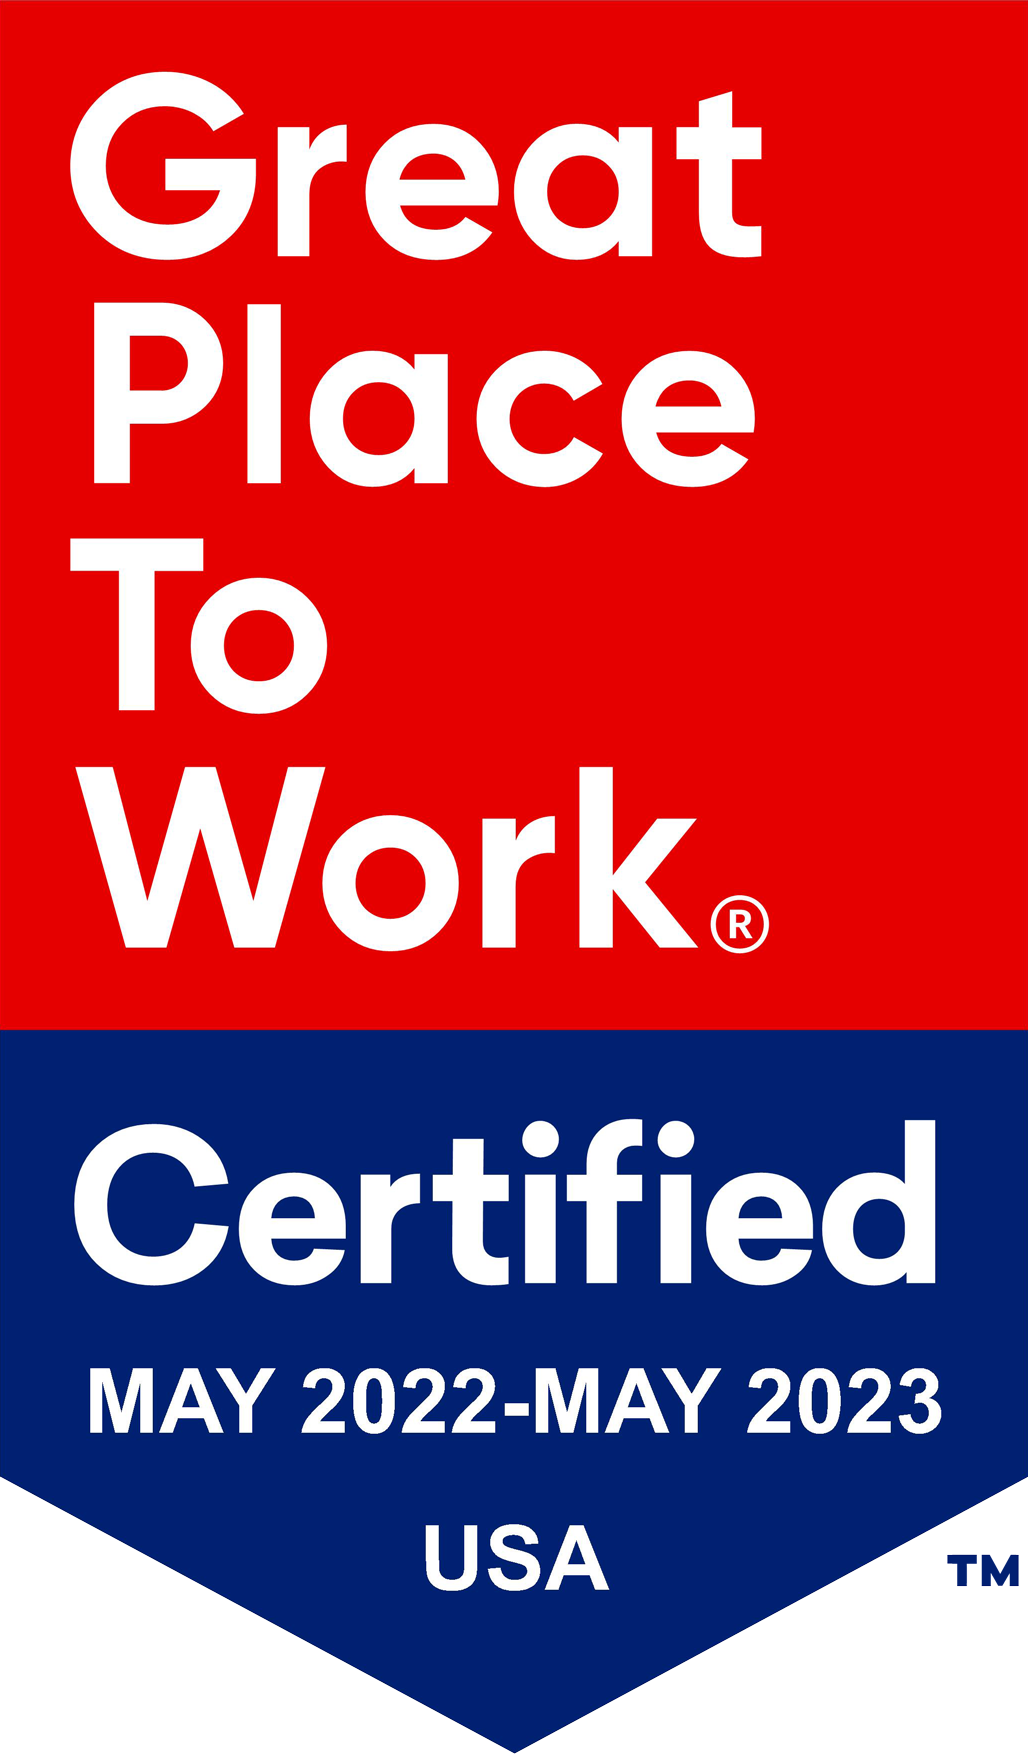 Great Place To Work Certified - Uniti Group